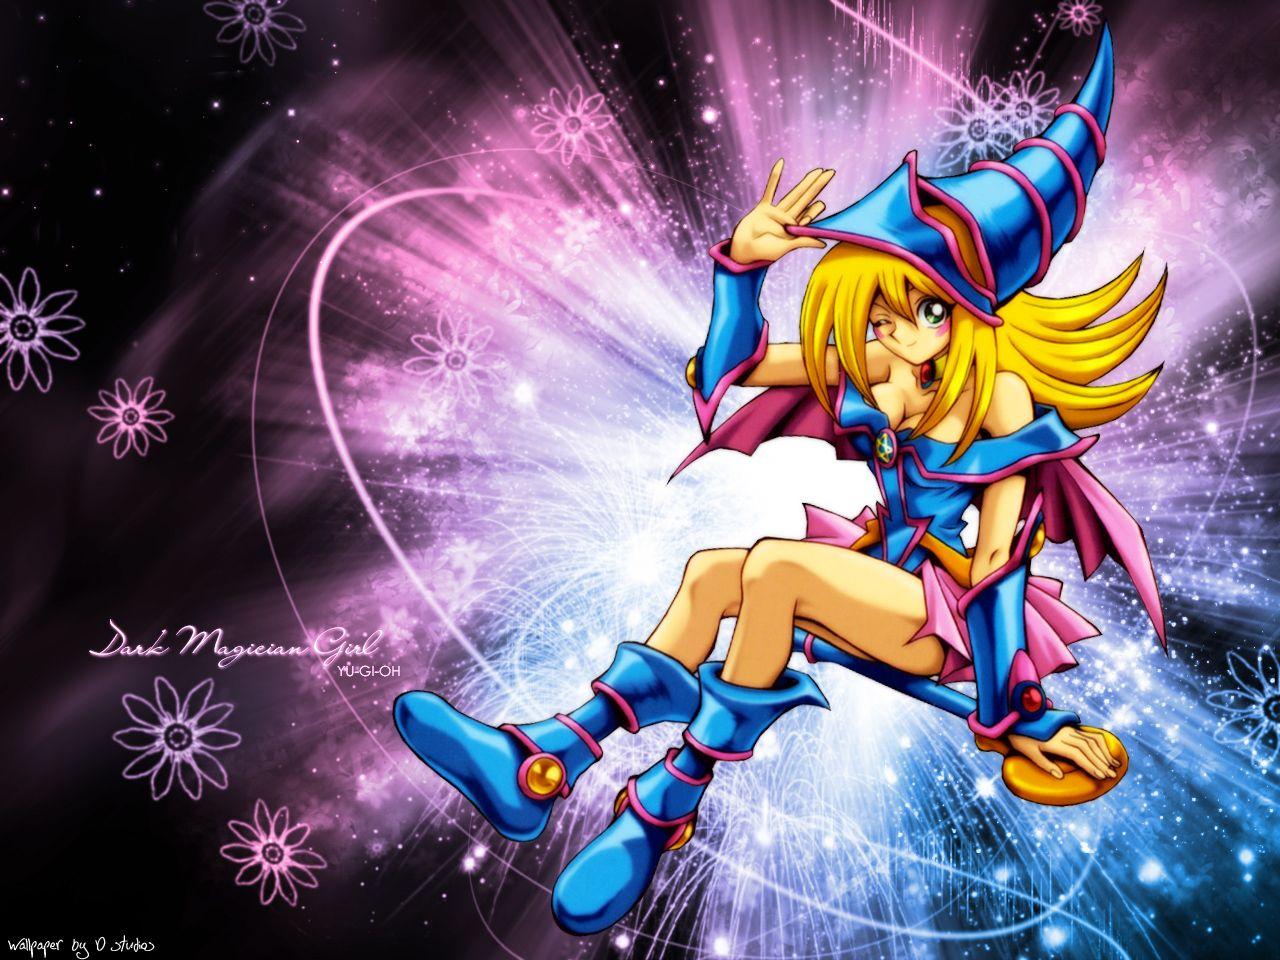 Dark Magician Girl. Another favorite up there with the Dark